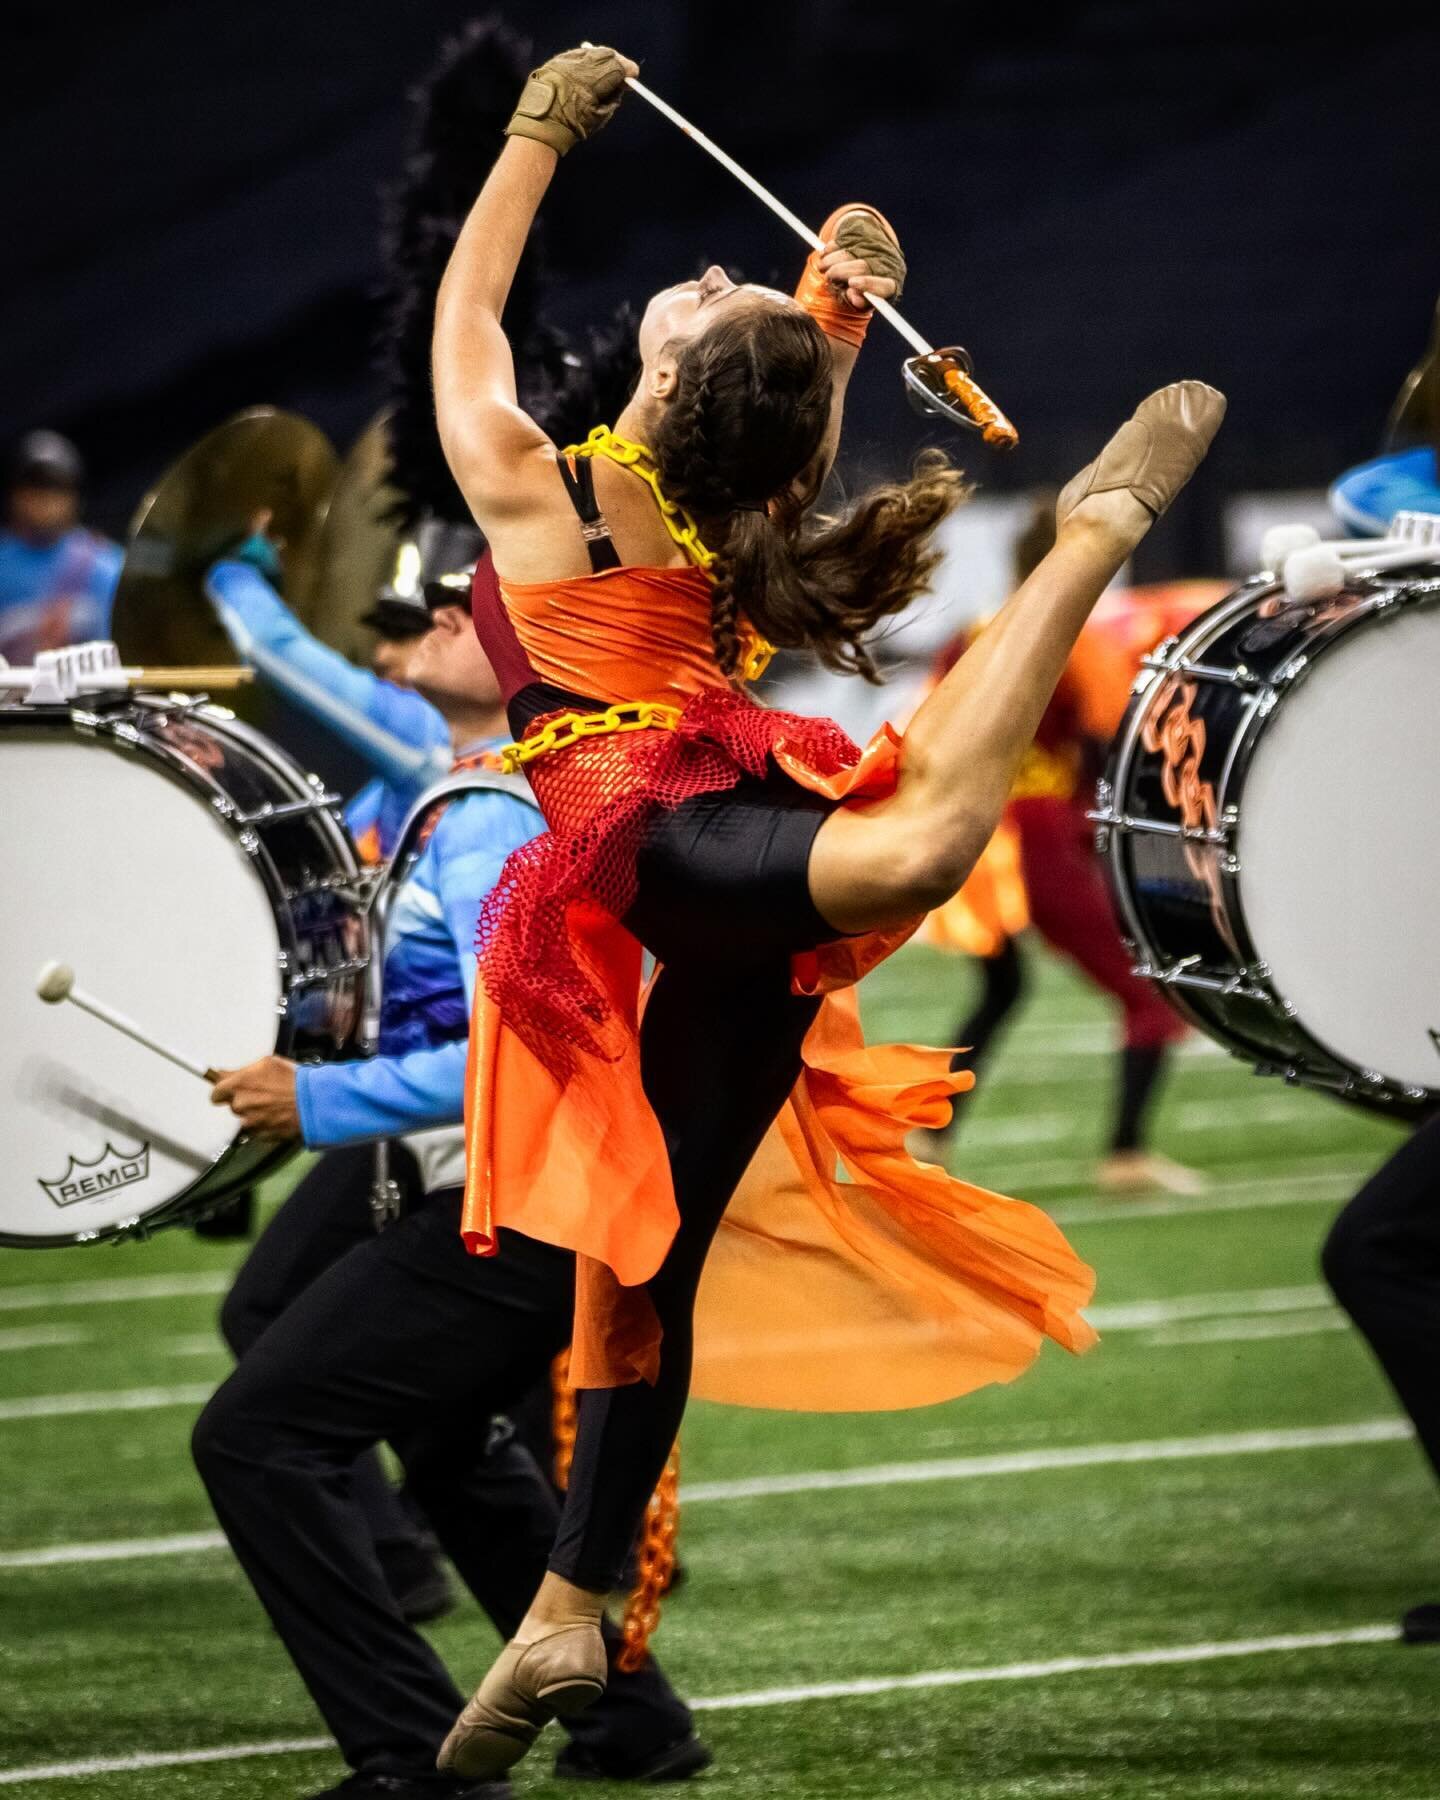 January Camp is right around the corner! Will we see you in Othello this weekend? #RollOn #columbiansdrumandbuglecorps #dciopenclass #marchopenclass #dci #dciauditions